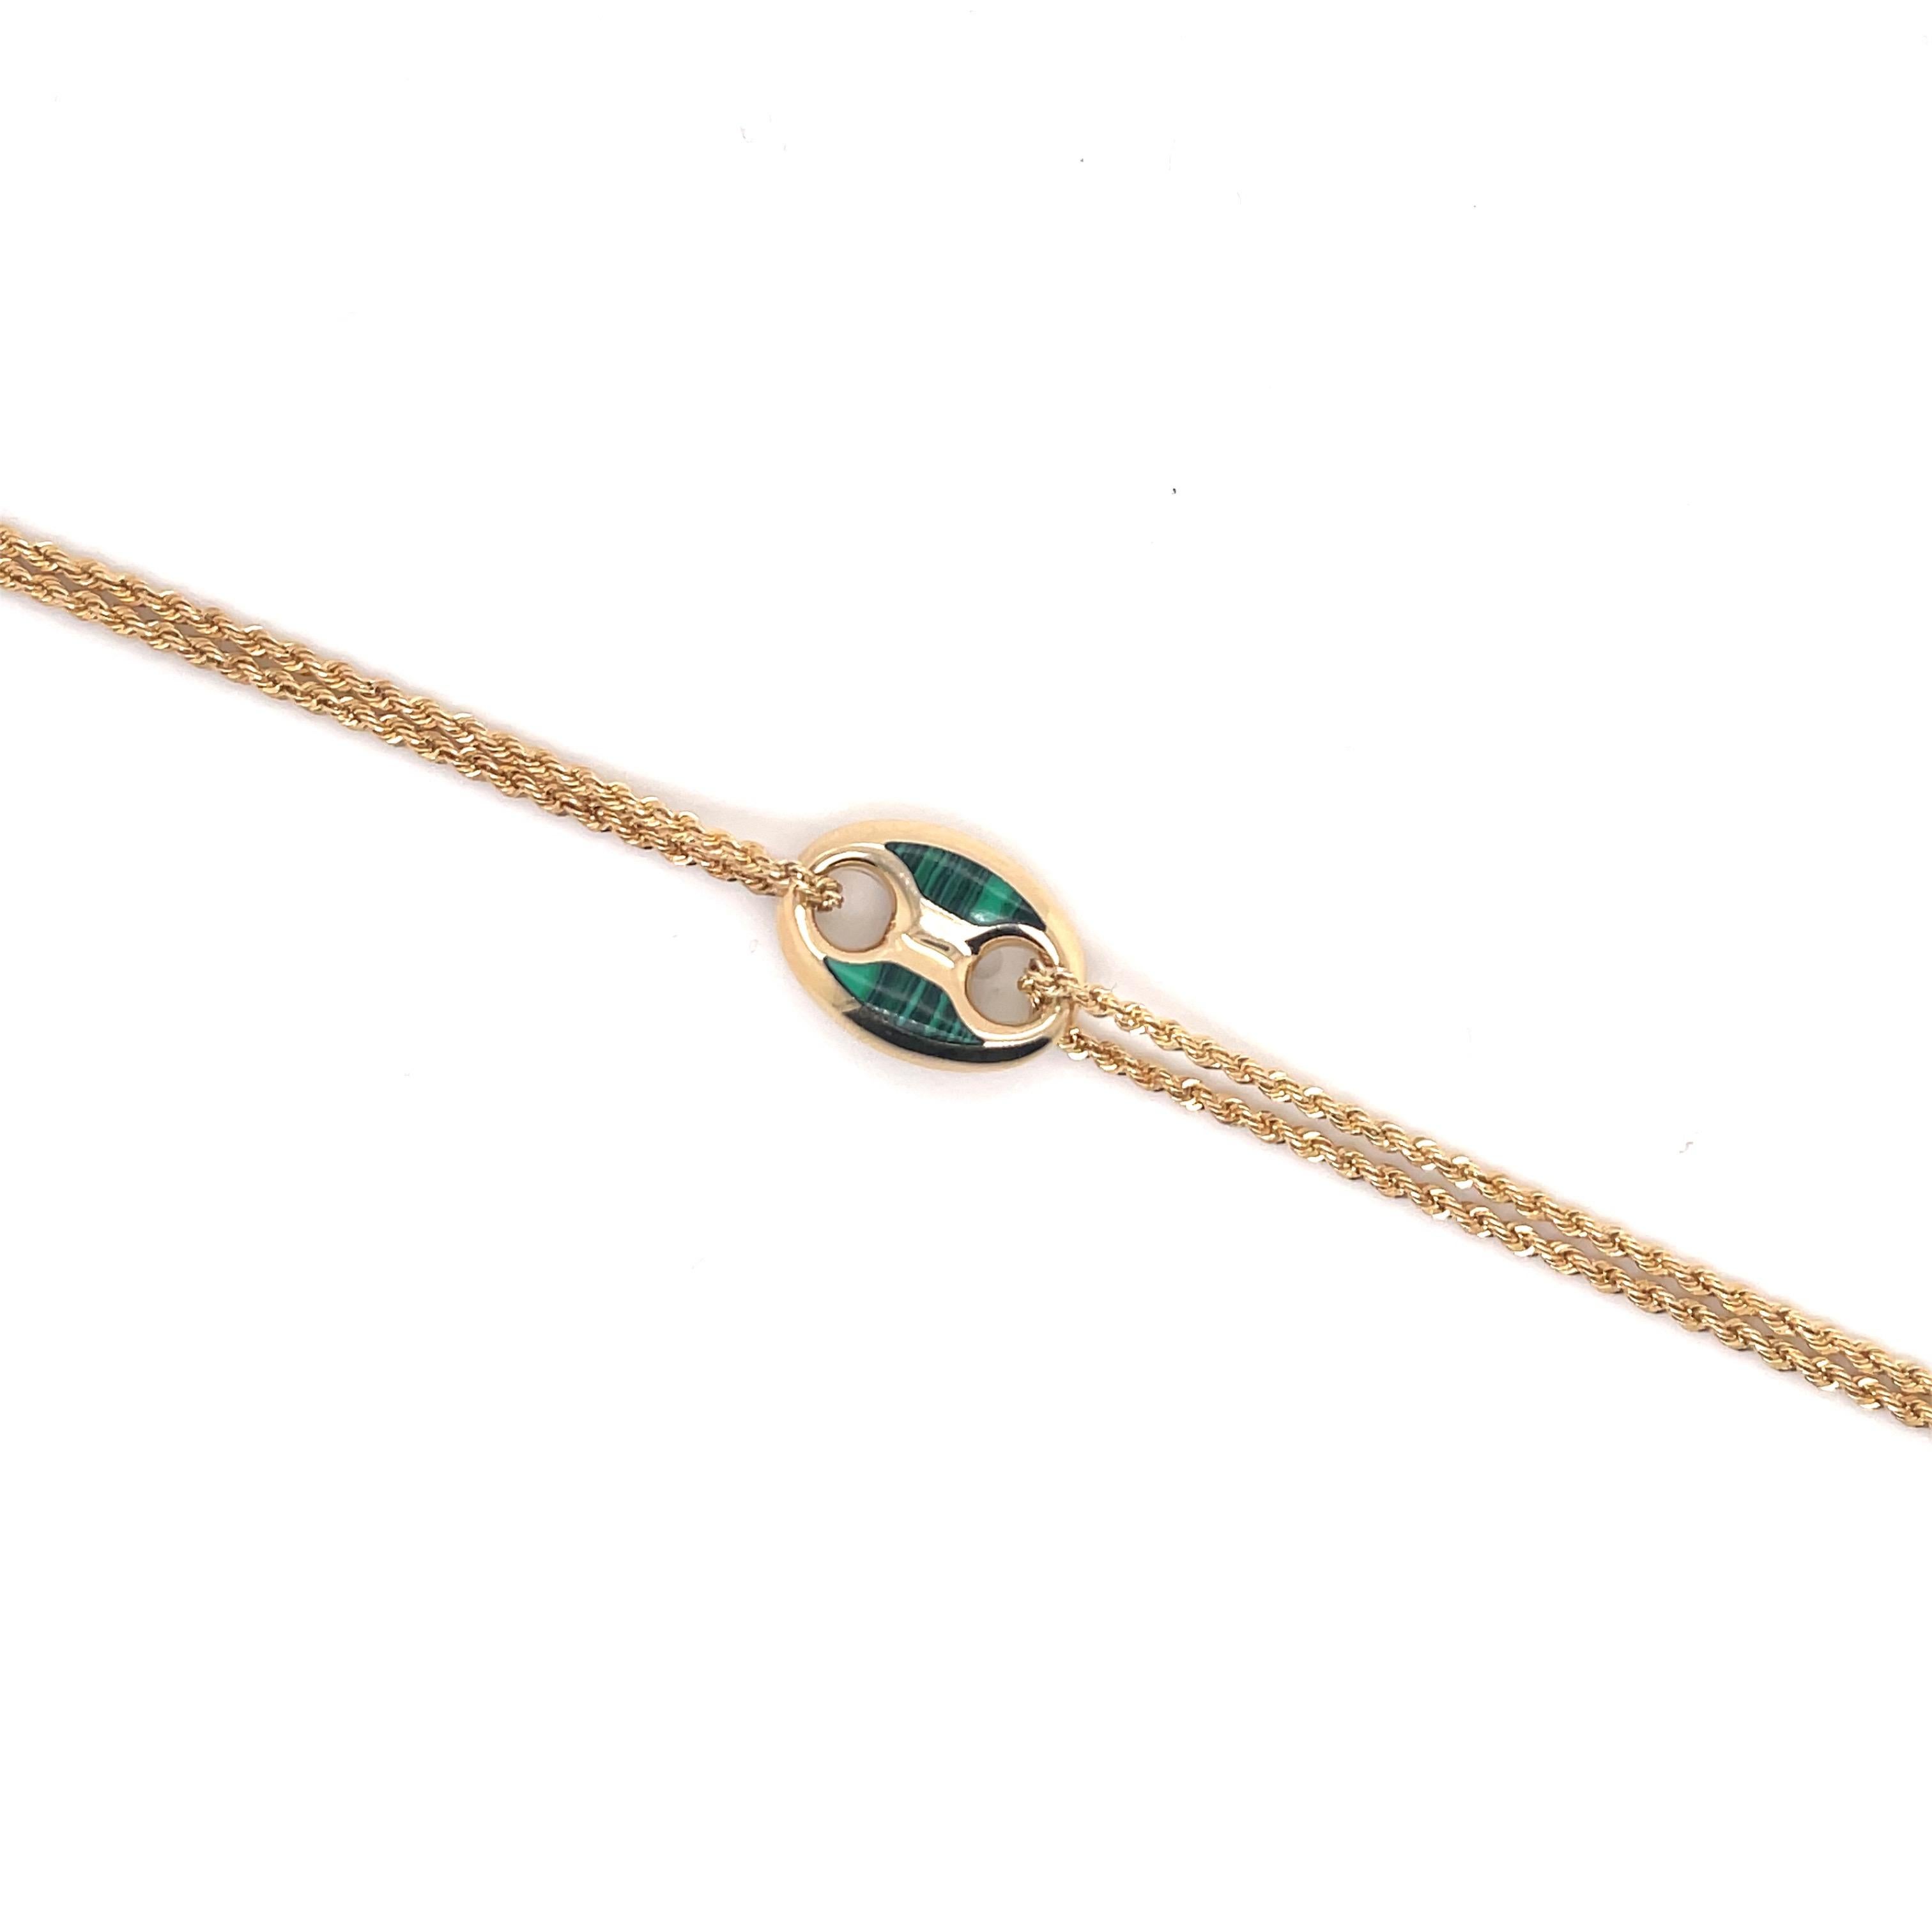 Made in Italy, this 14 karat yellow gold bracelet features one Mariner link with green overlay. 
More colors available.
Great for stacking! 
Email for more pictures & styles. 
